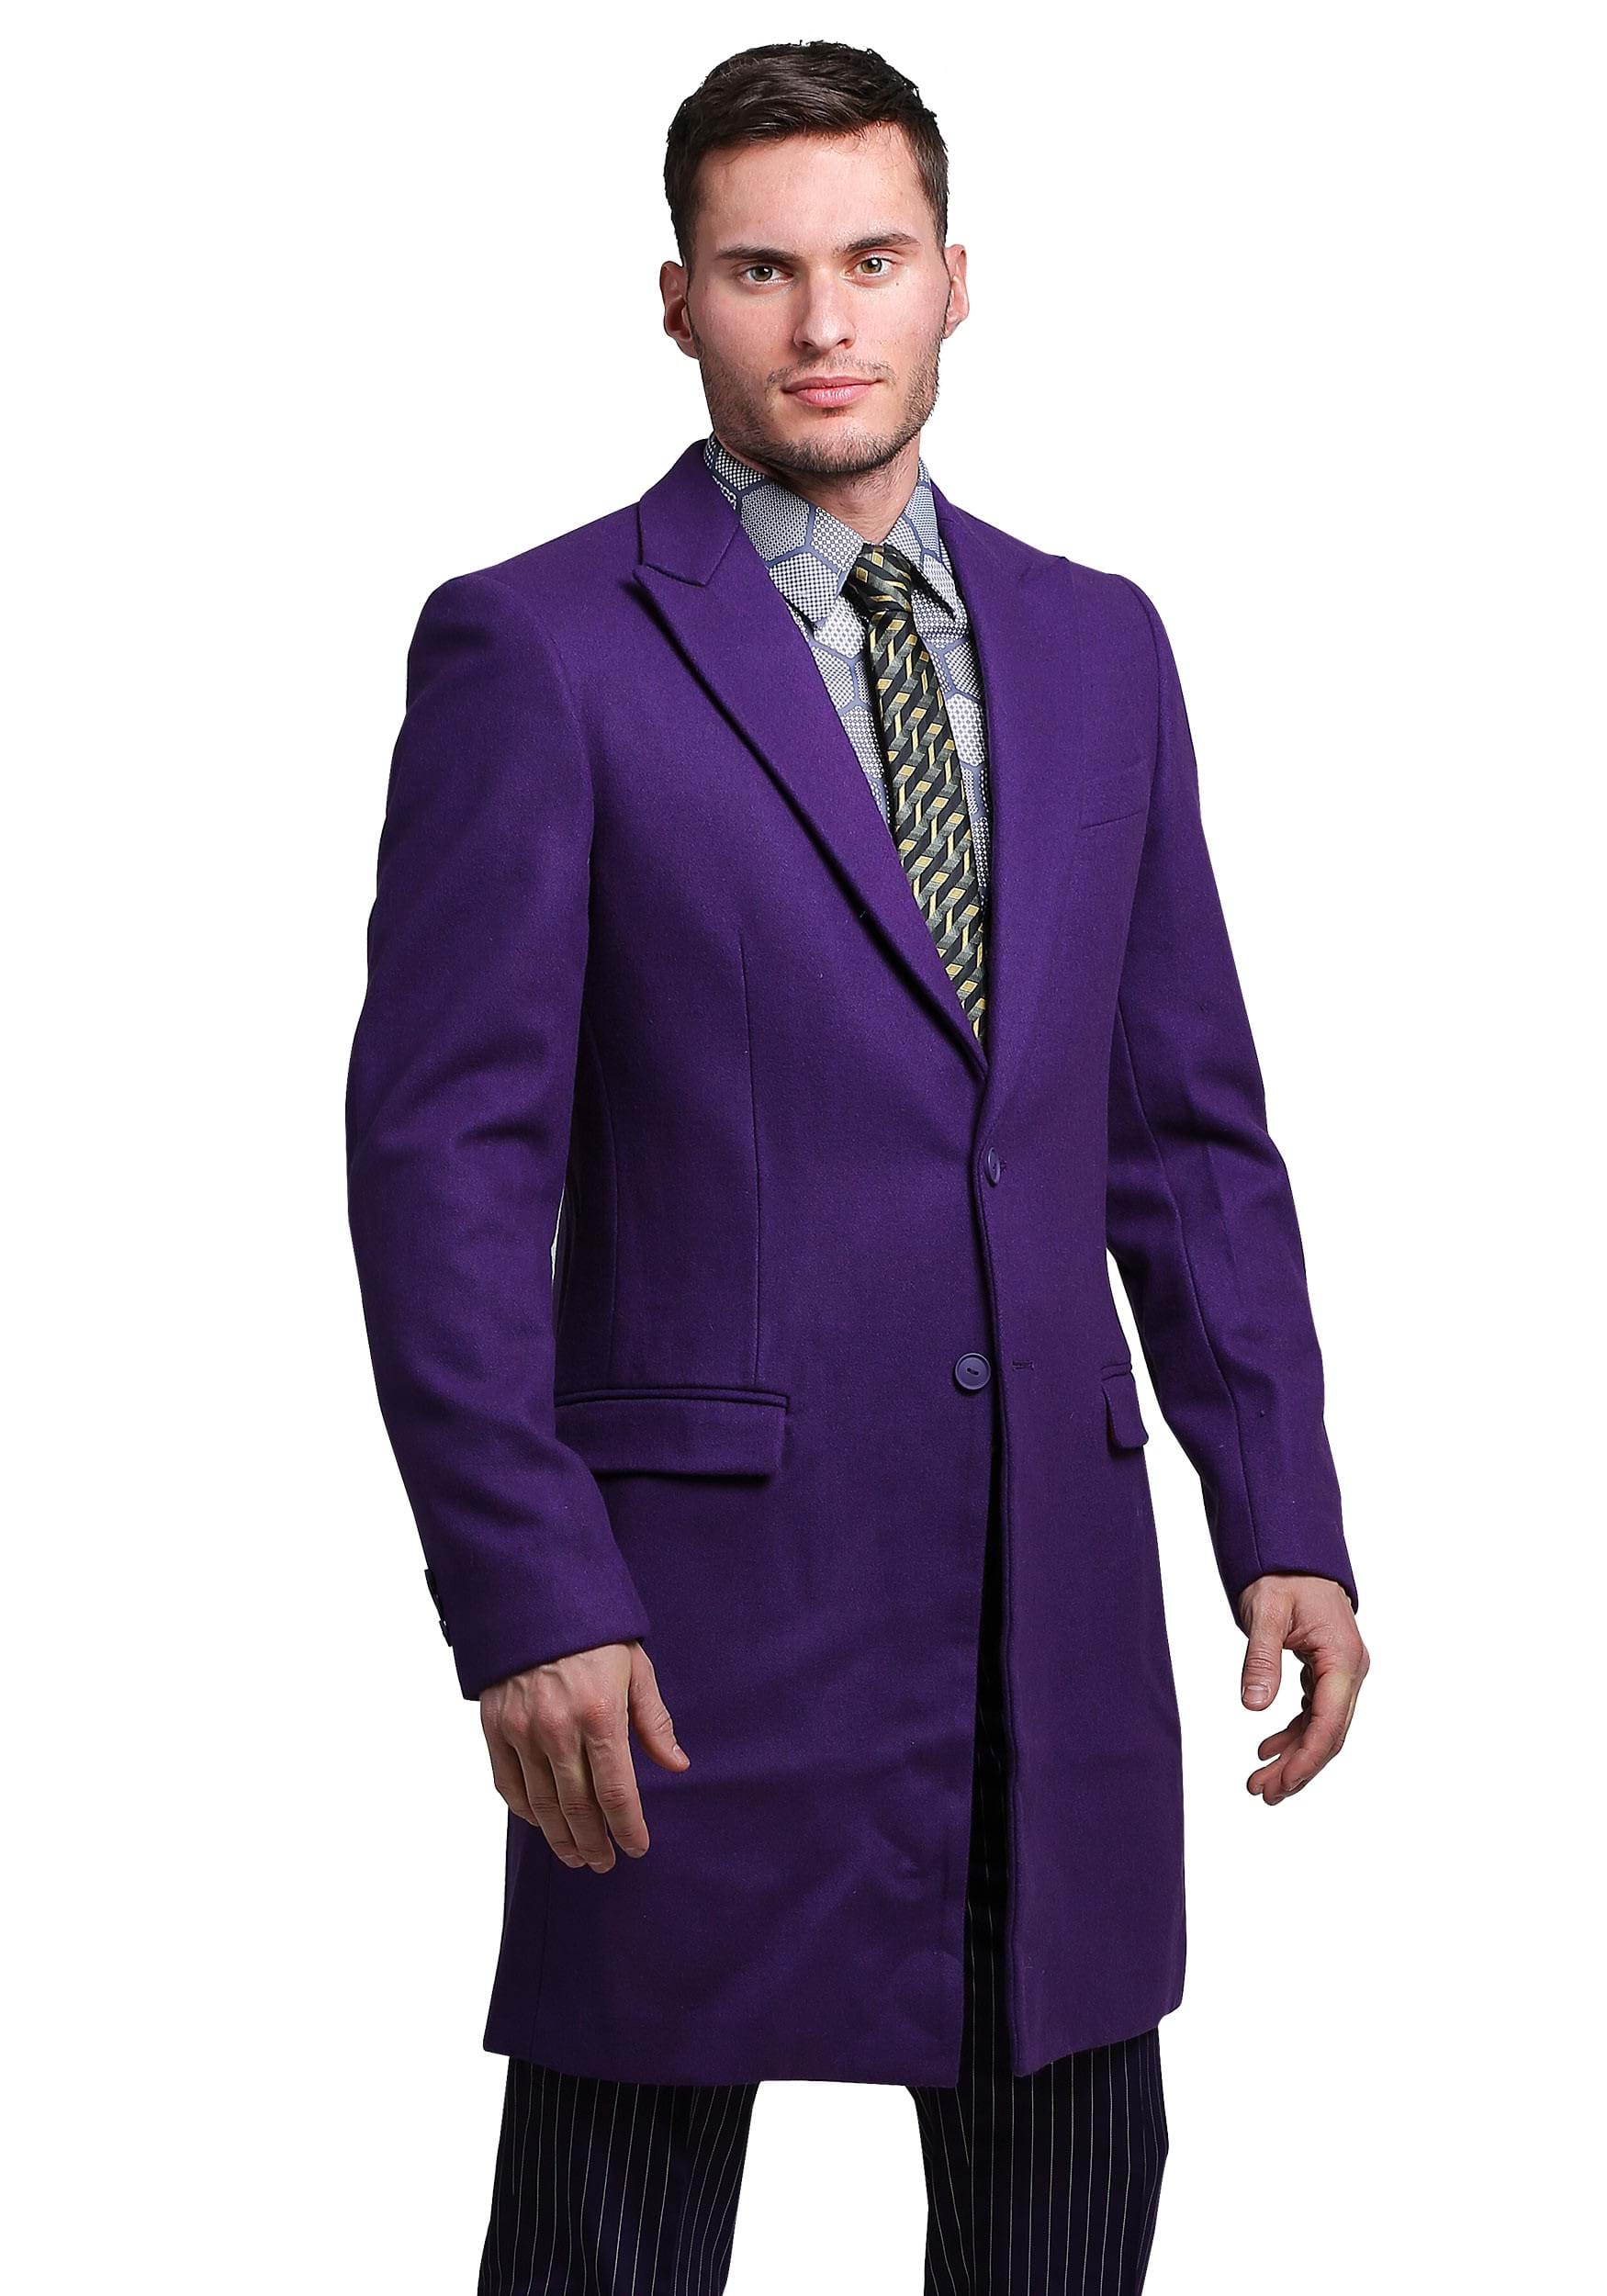 Image of THE JOKER Slim Fit Suit Overcoat (Authentic) ID FUN9011O-42